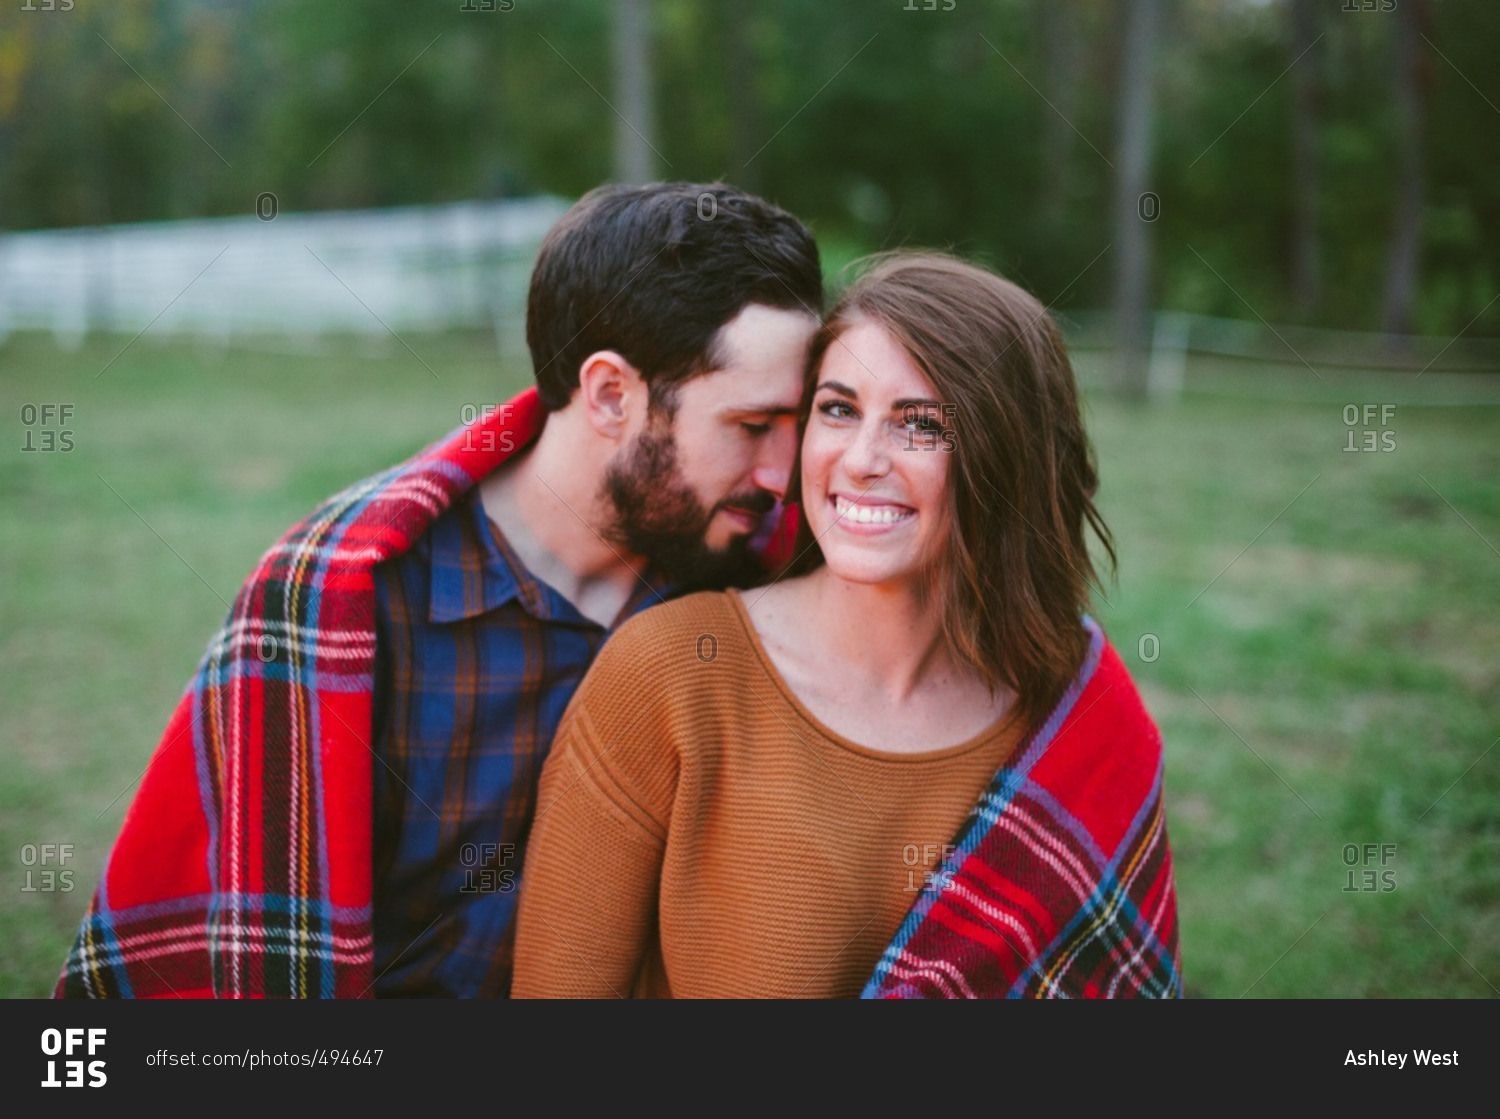 Smiling woman with man under blanket